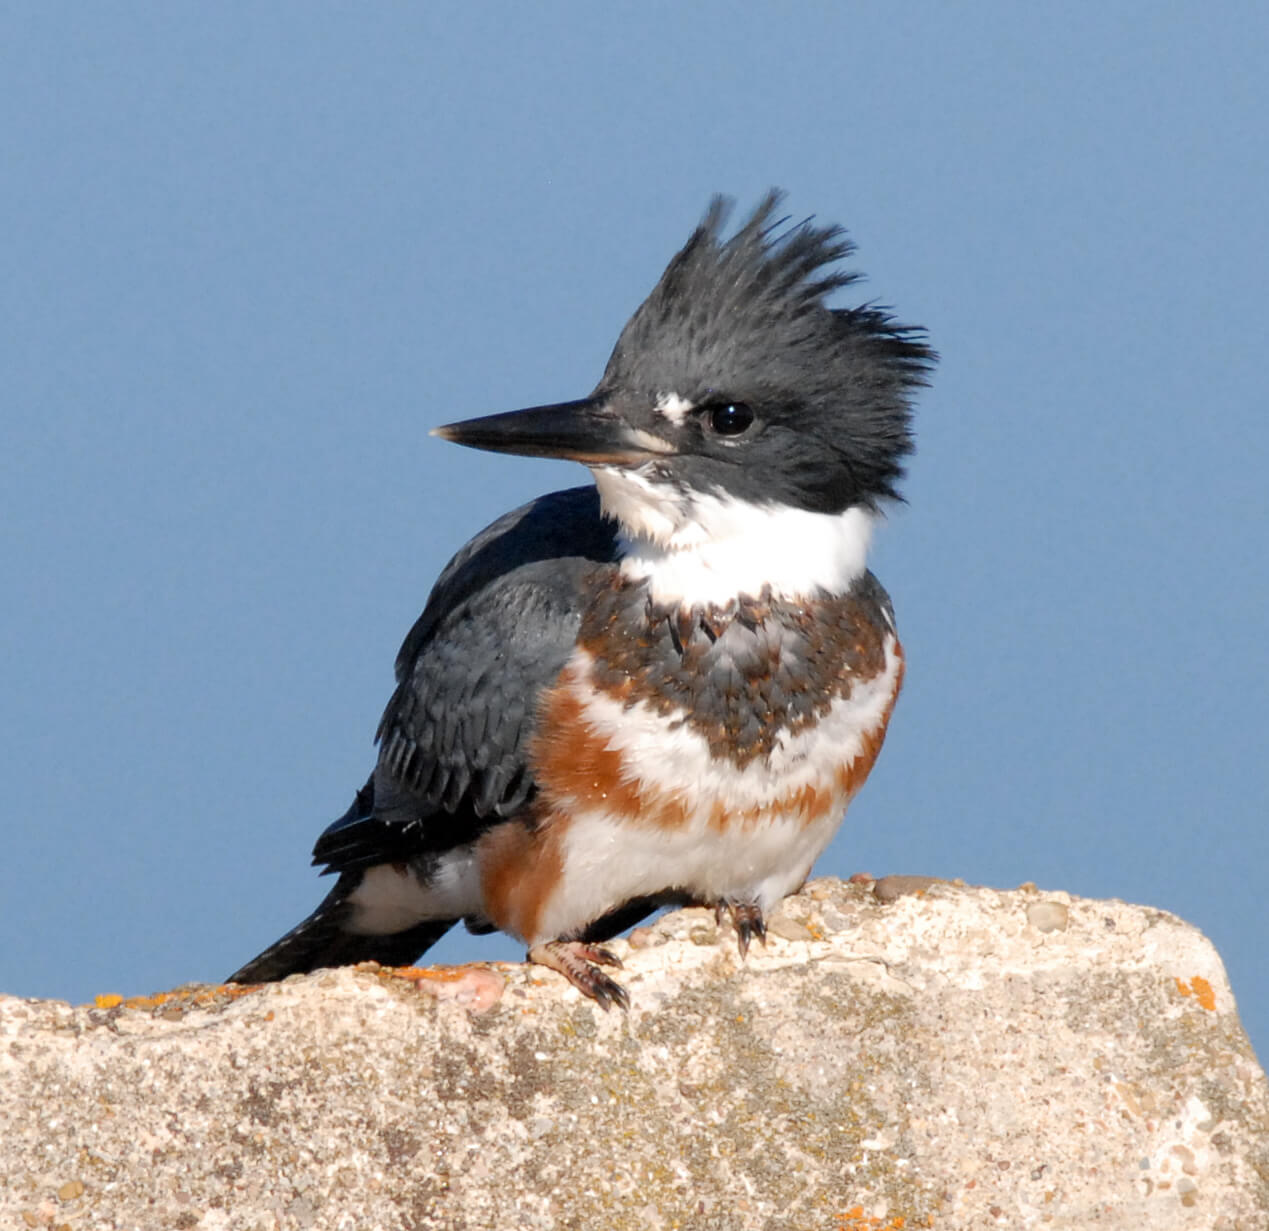 Belted kingfisher's rattling call is another harbinger of fall